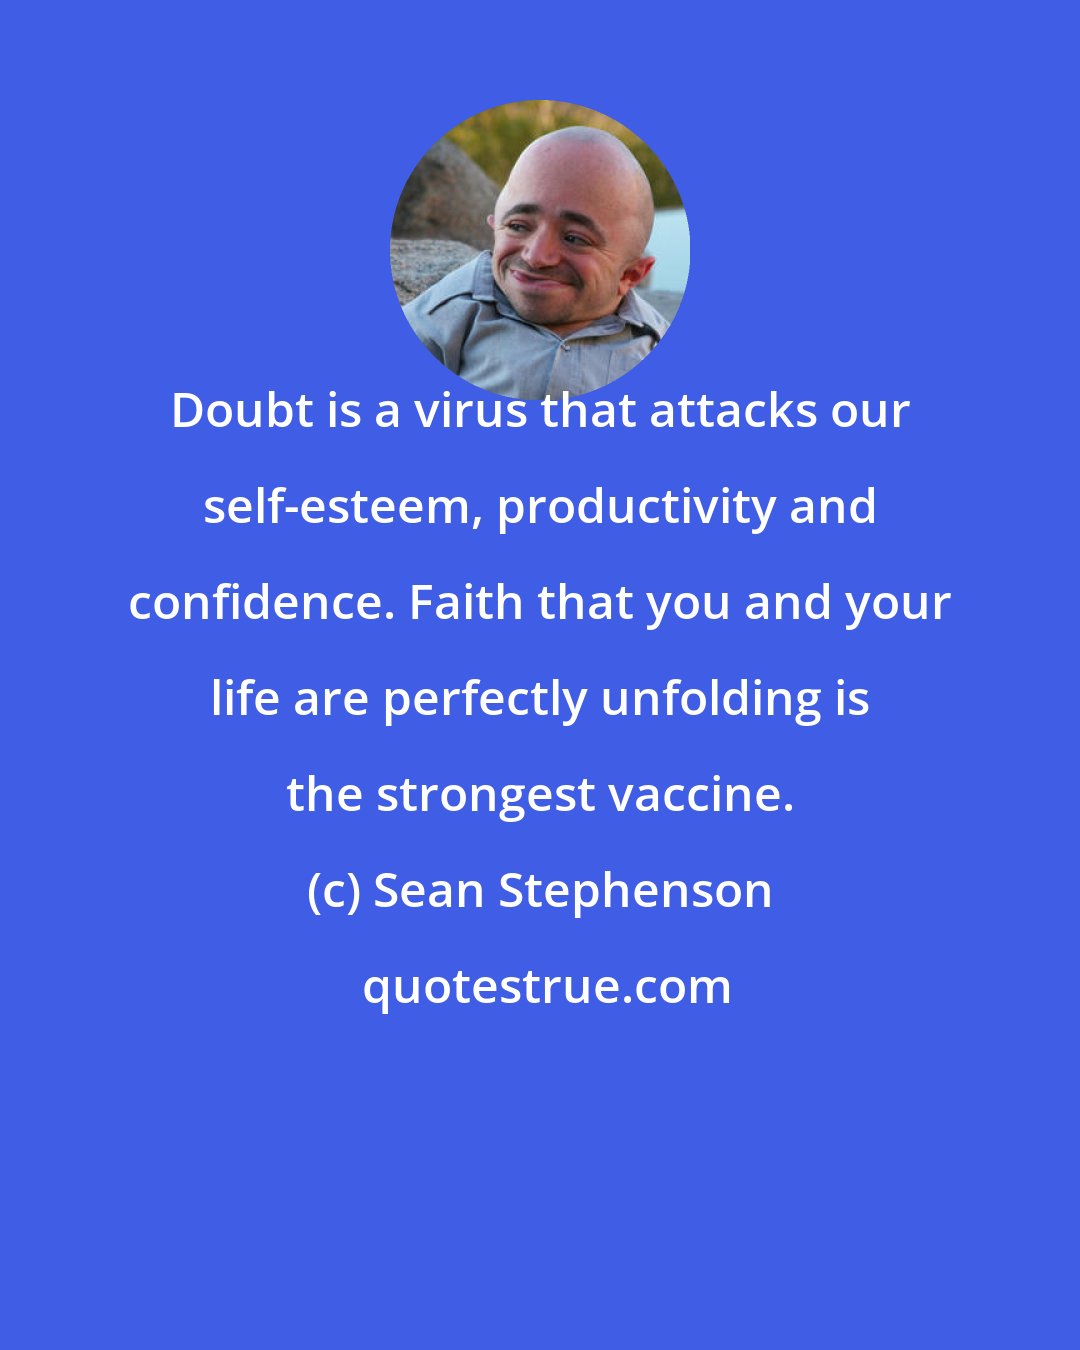 Sean Stephenson: Doubt is a virus that attacks our self-esteem, productivity and confidence. Faith that you and your life are perfectly unfolding is the strongest vaccine.